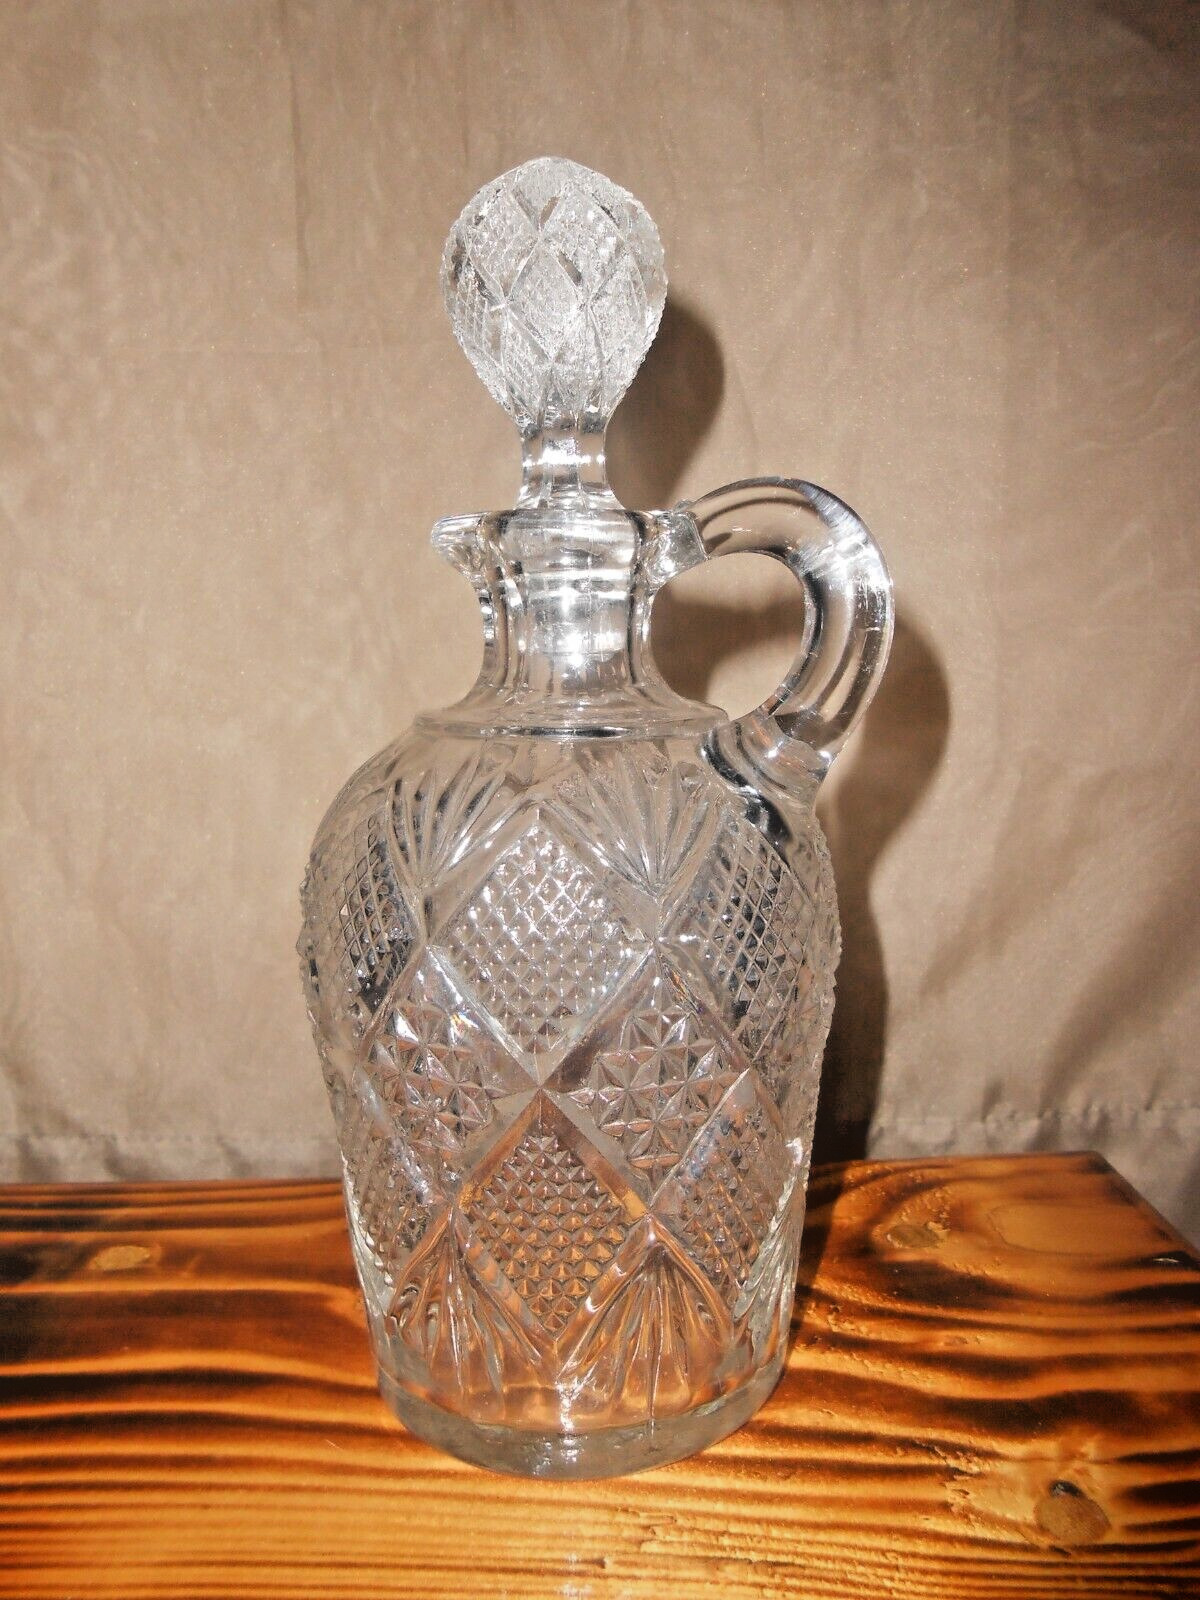 Circa 1896 EAPG “Peerless” Collection Decanter by Model Flint Glass Company